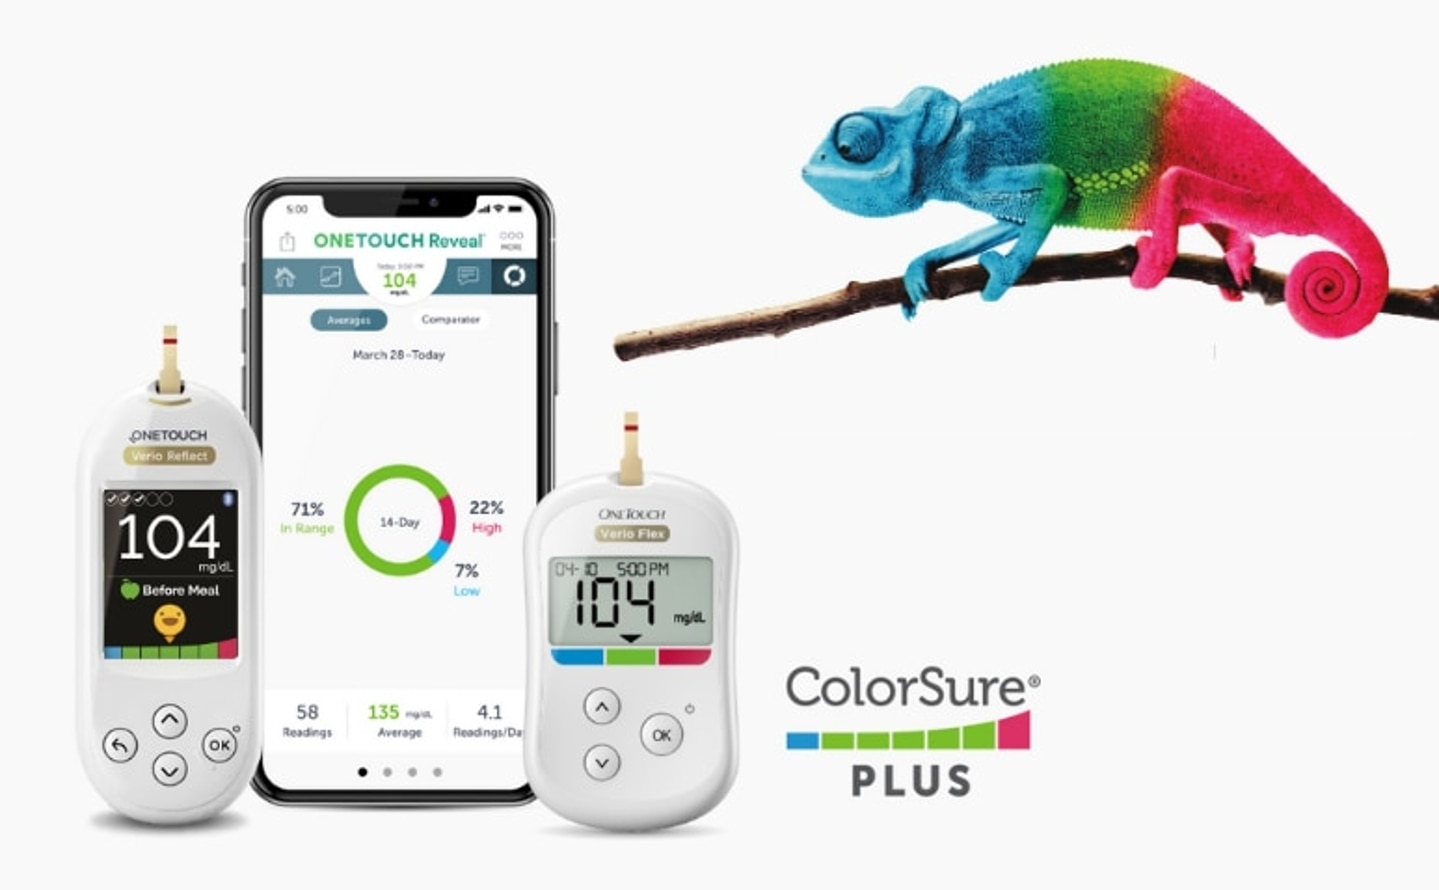 Buy OneTouch Verio Flex Glucose Meter Kit For Diabetic Petient Online in  USA at the Best Prices